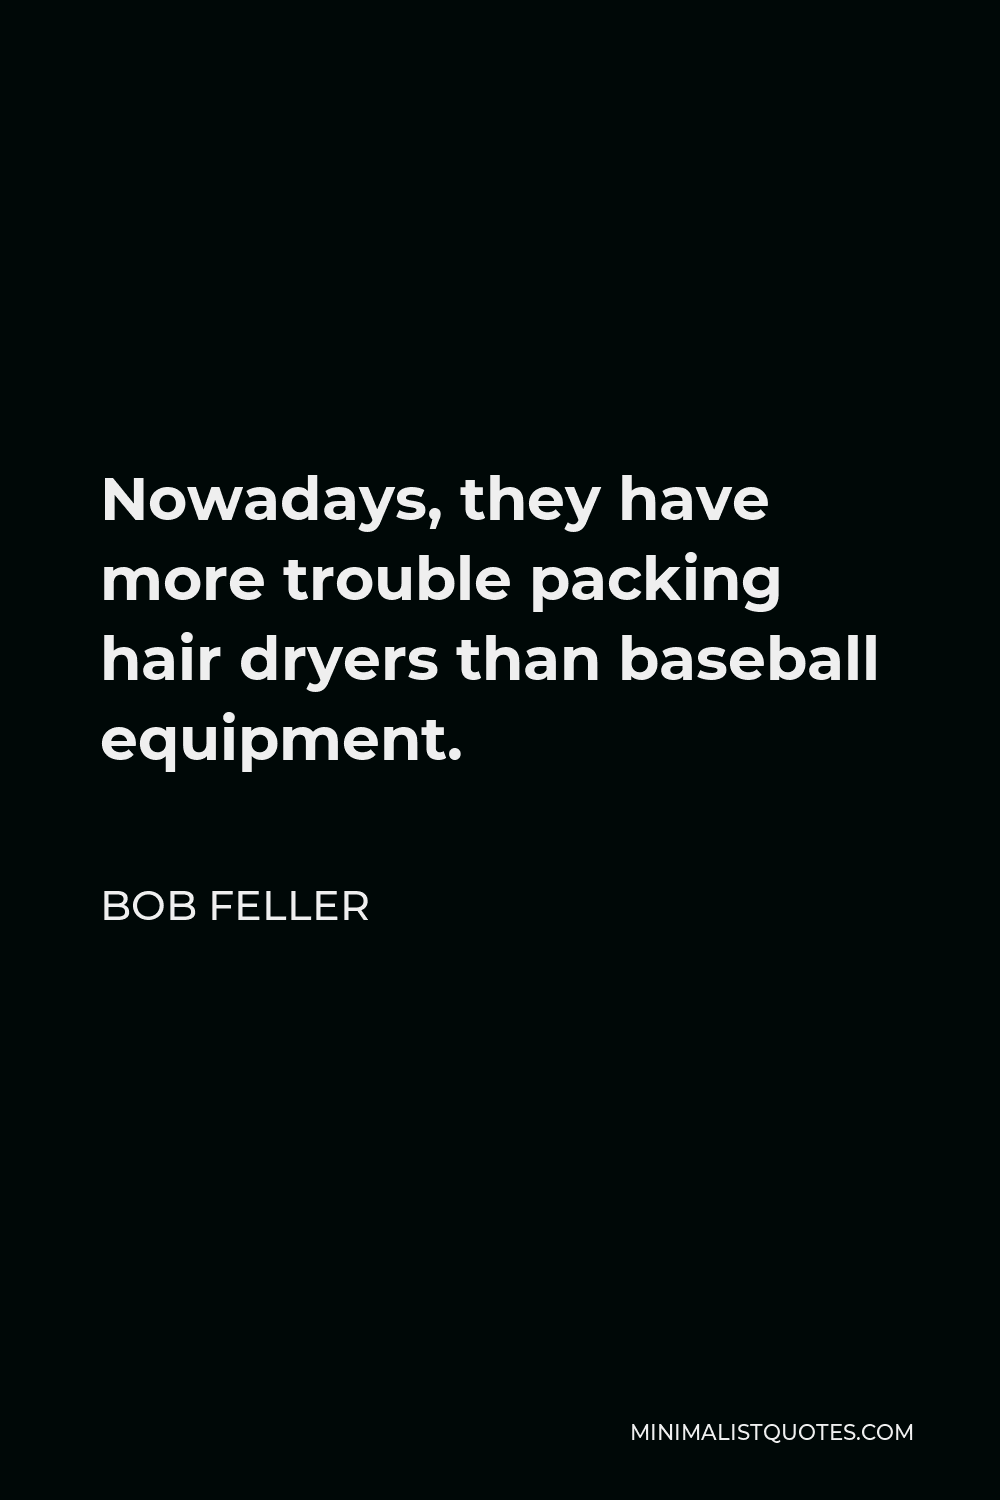 Bob Feller Quote - Nowadays, they have more trouble packing hair dryers than baseball equipment.